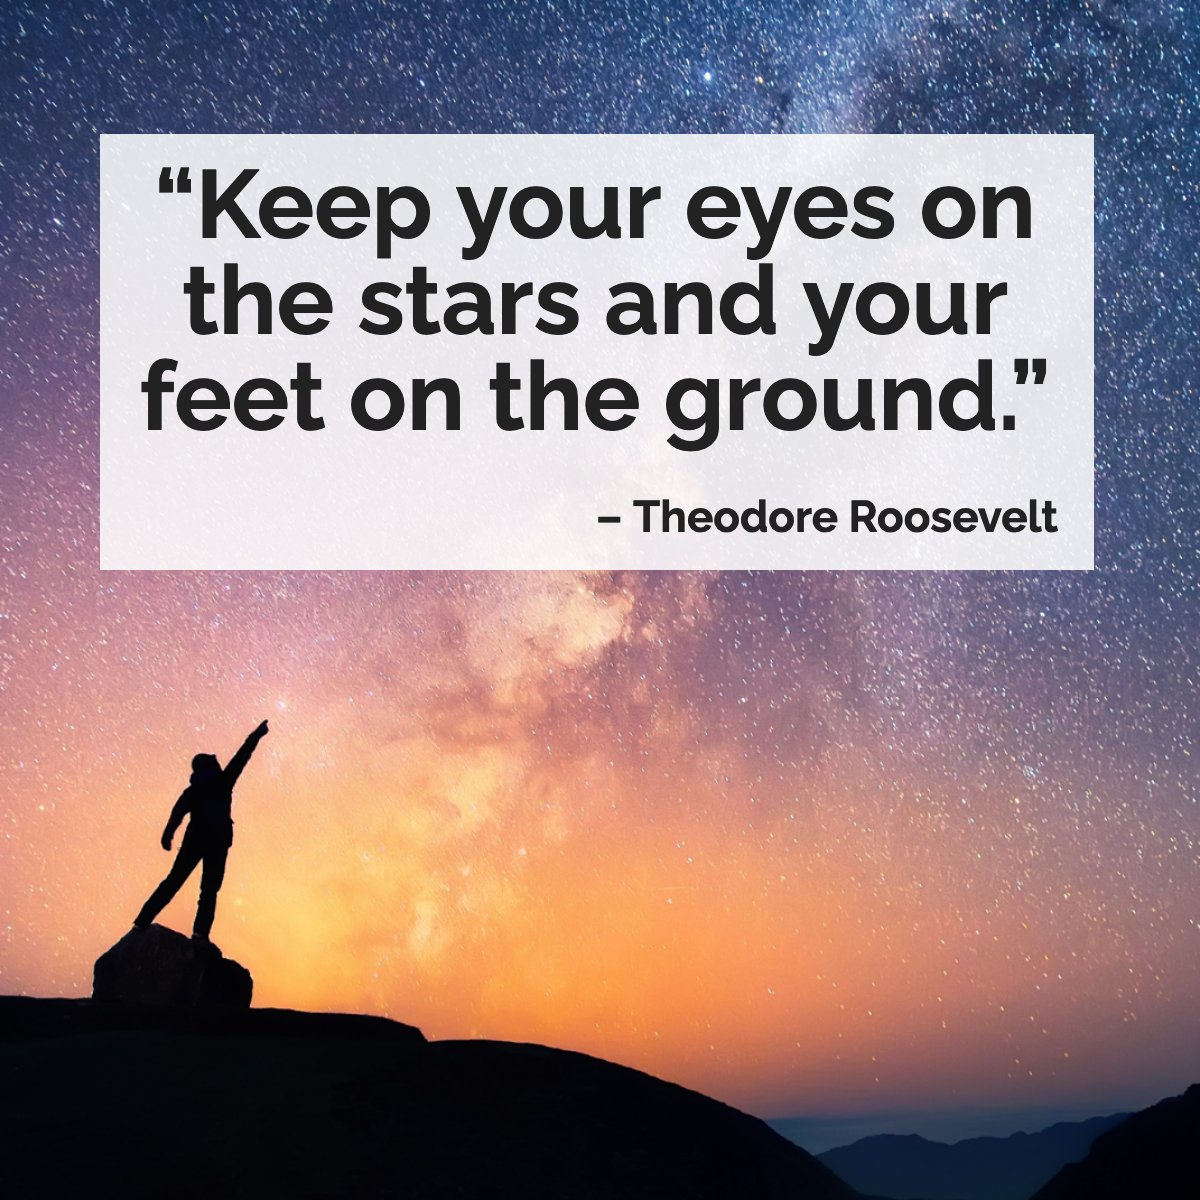 Dream big but stay grounded, that's the key ✨

 #wisdomquote  #wisdomoftheday  #quotegram  #quoteoftheday   #theodoreroosevelt

#justclosed #weloveourclients #homebuyers #homeowner #homeclosing #coloradospringsrealestate #coloradospringsrealtor #coloradosprings